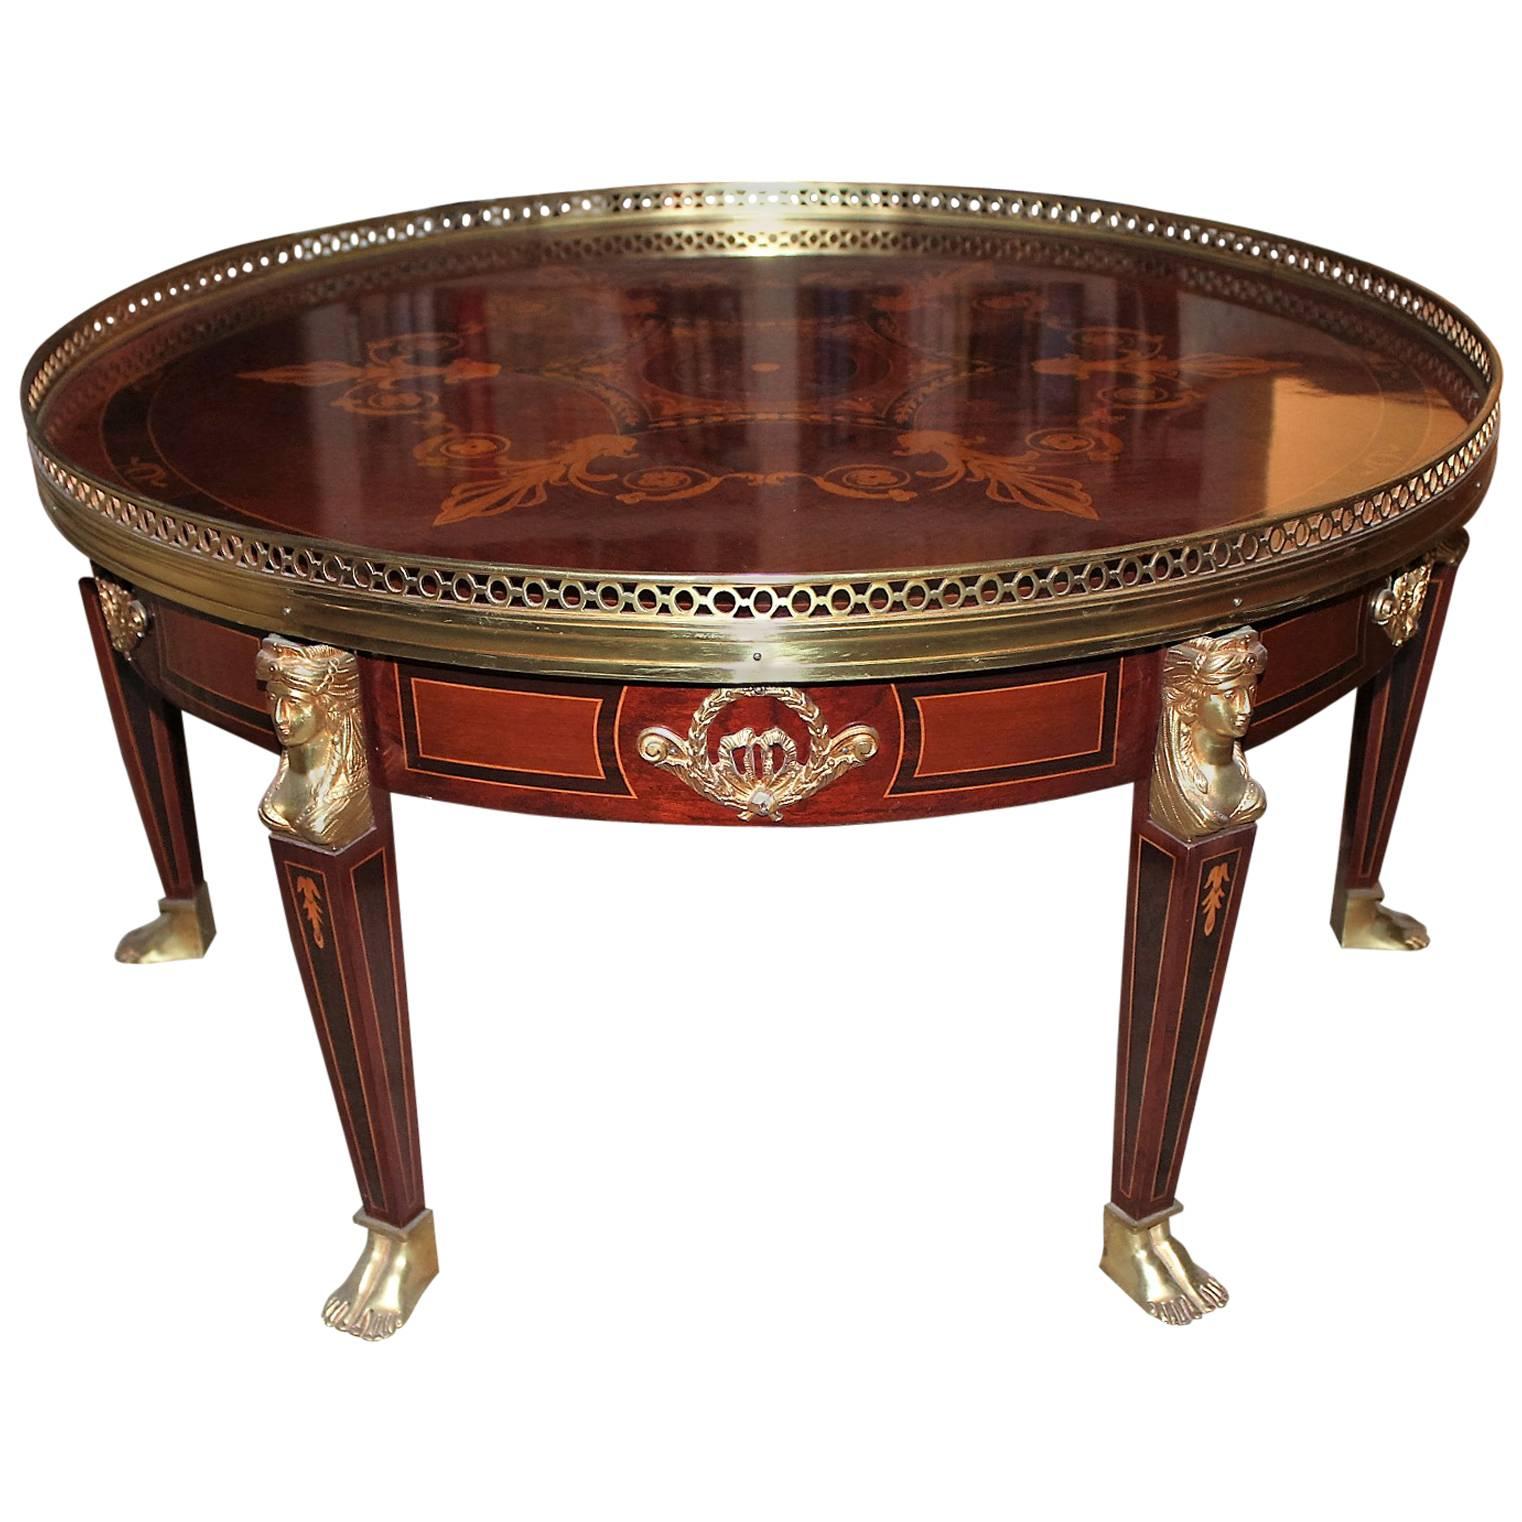 French Empire Round Inlaid Coffee Table